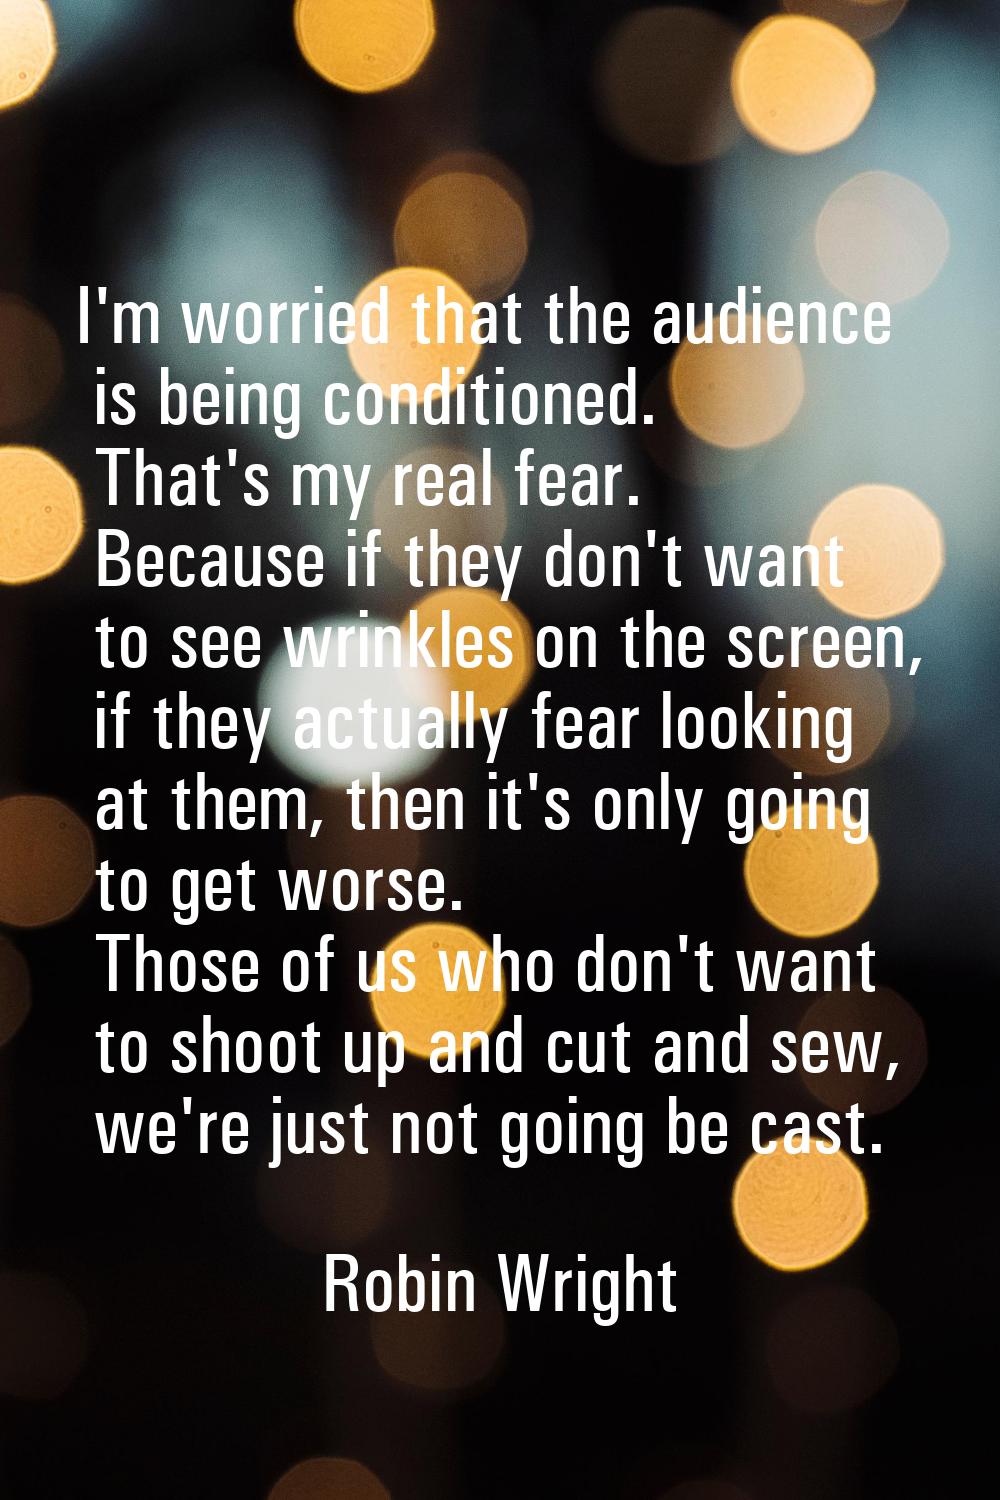 I'm worried that the audience is being conditioned. That's my real fear. Because if they don't want